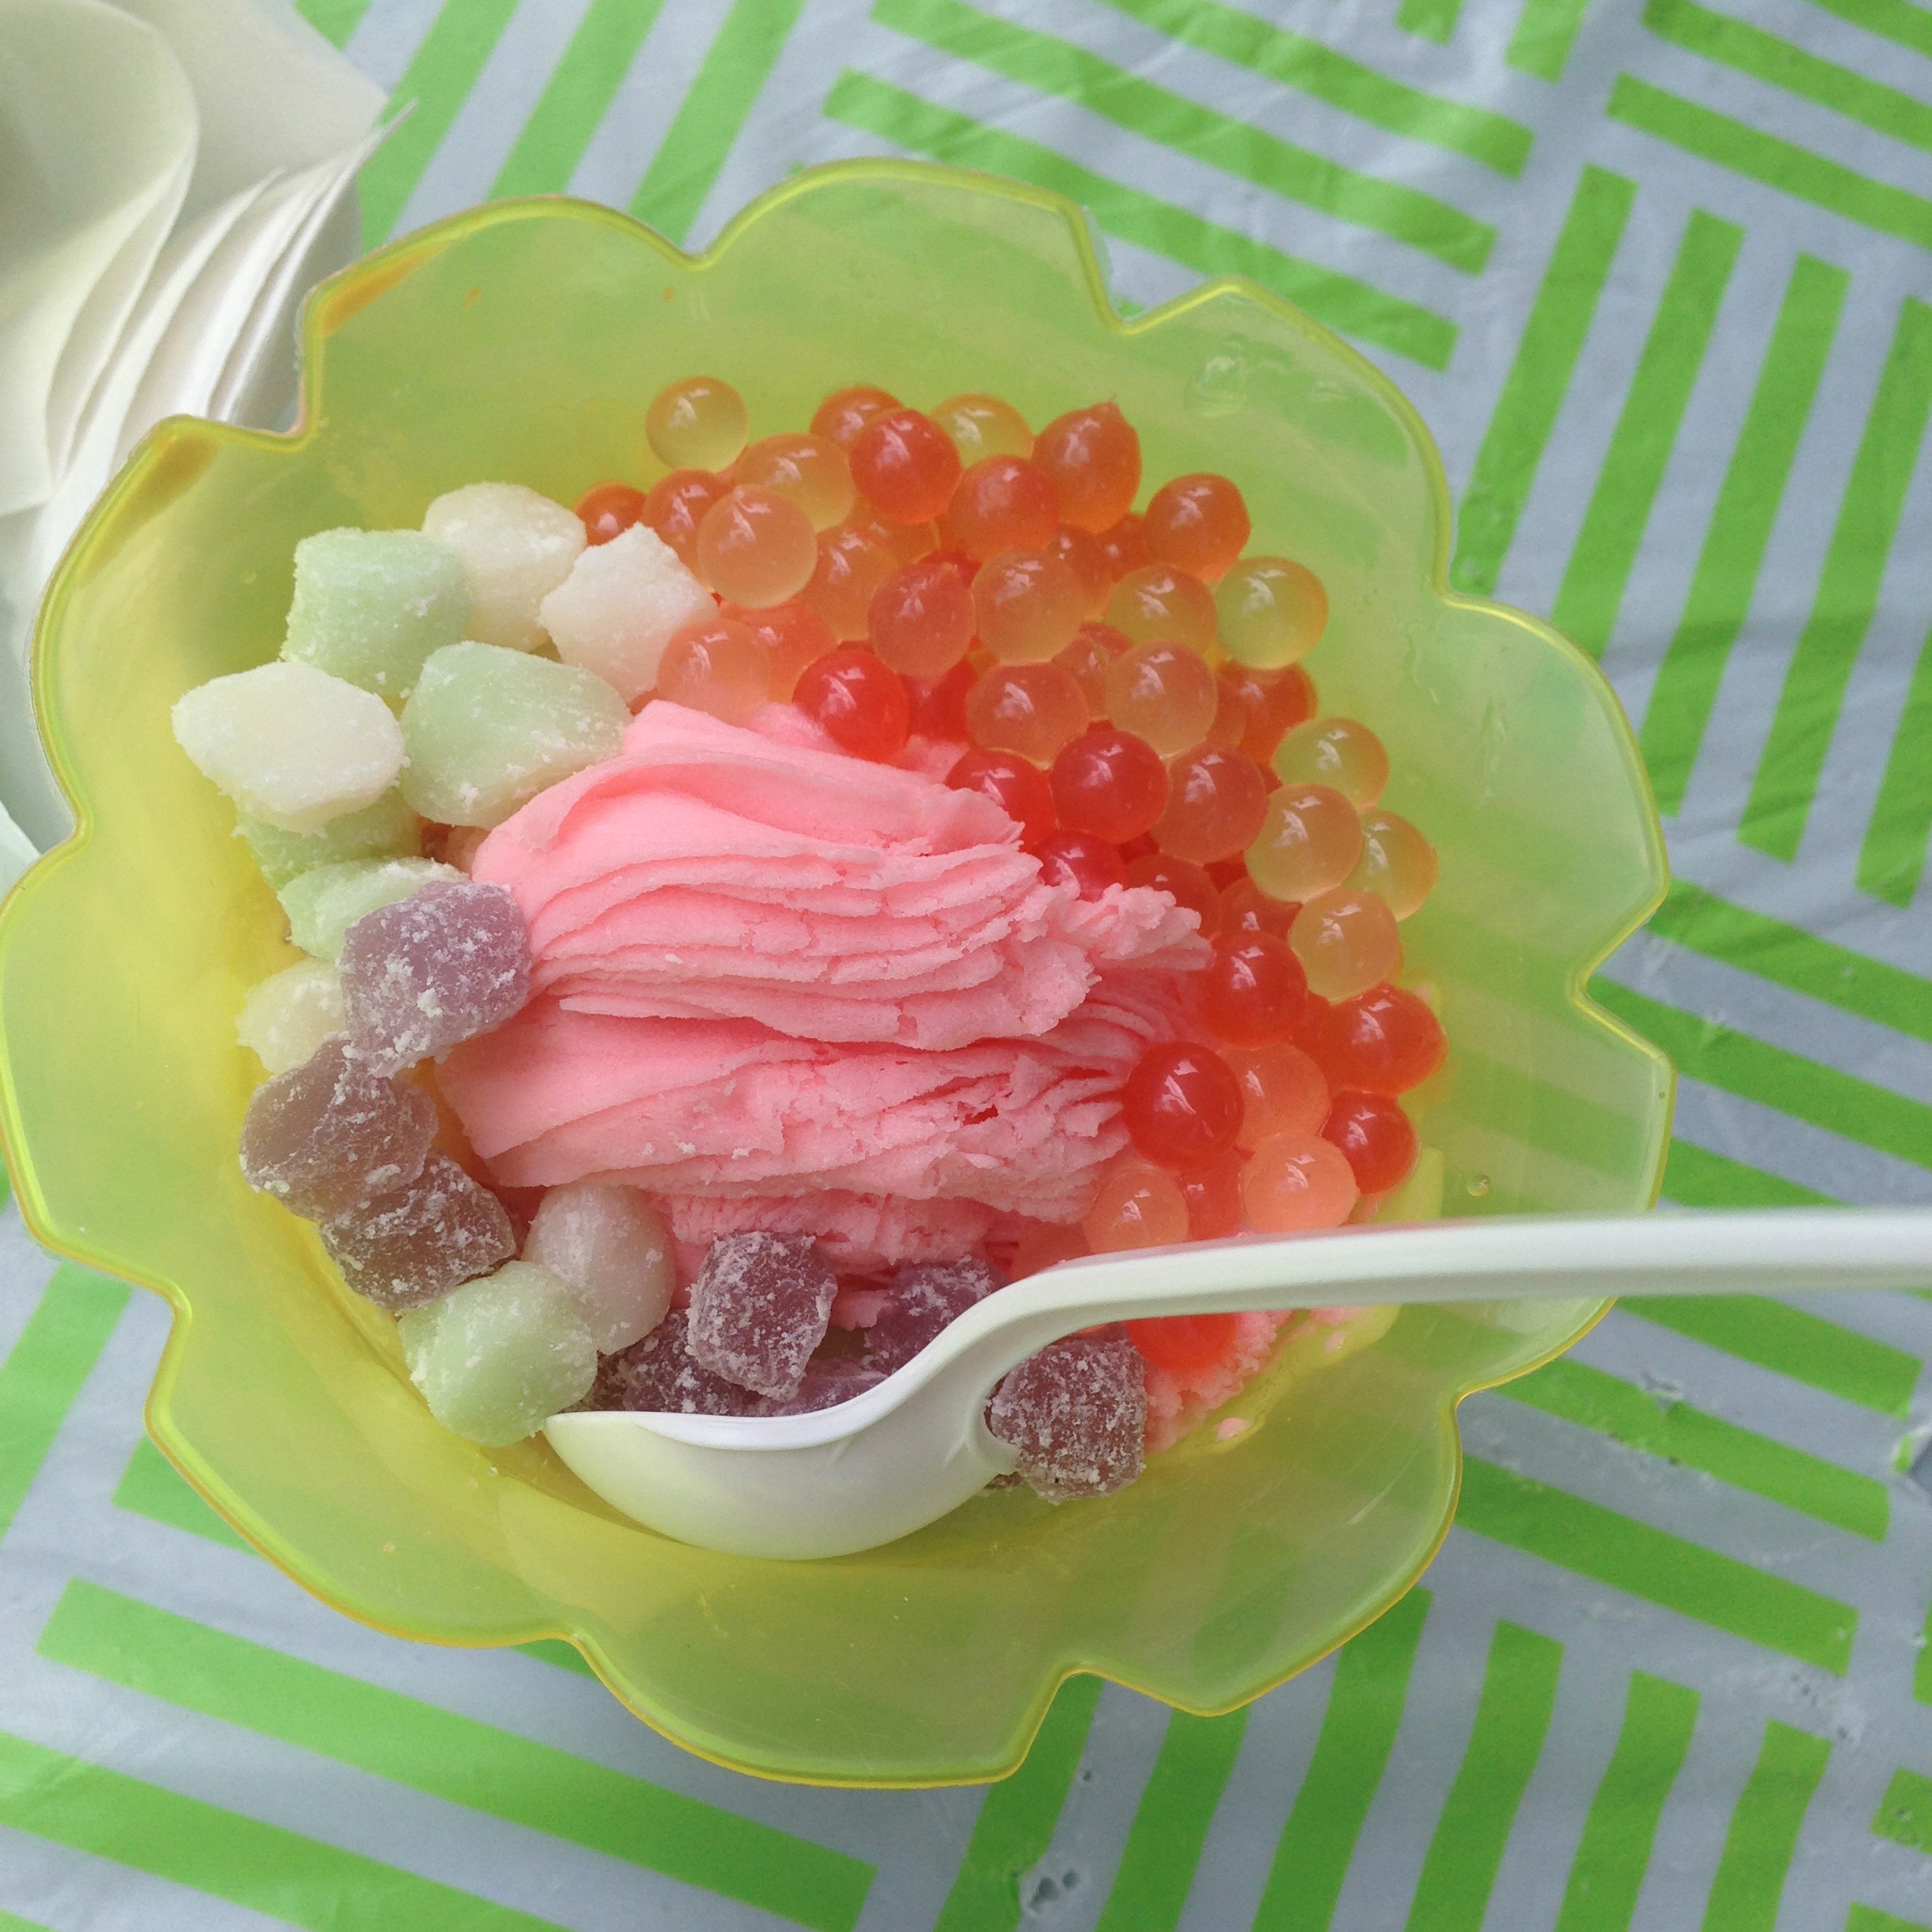 Strawberry snow ice with mochi cubes and tapioca.